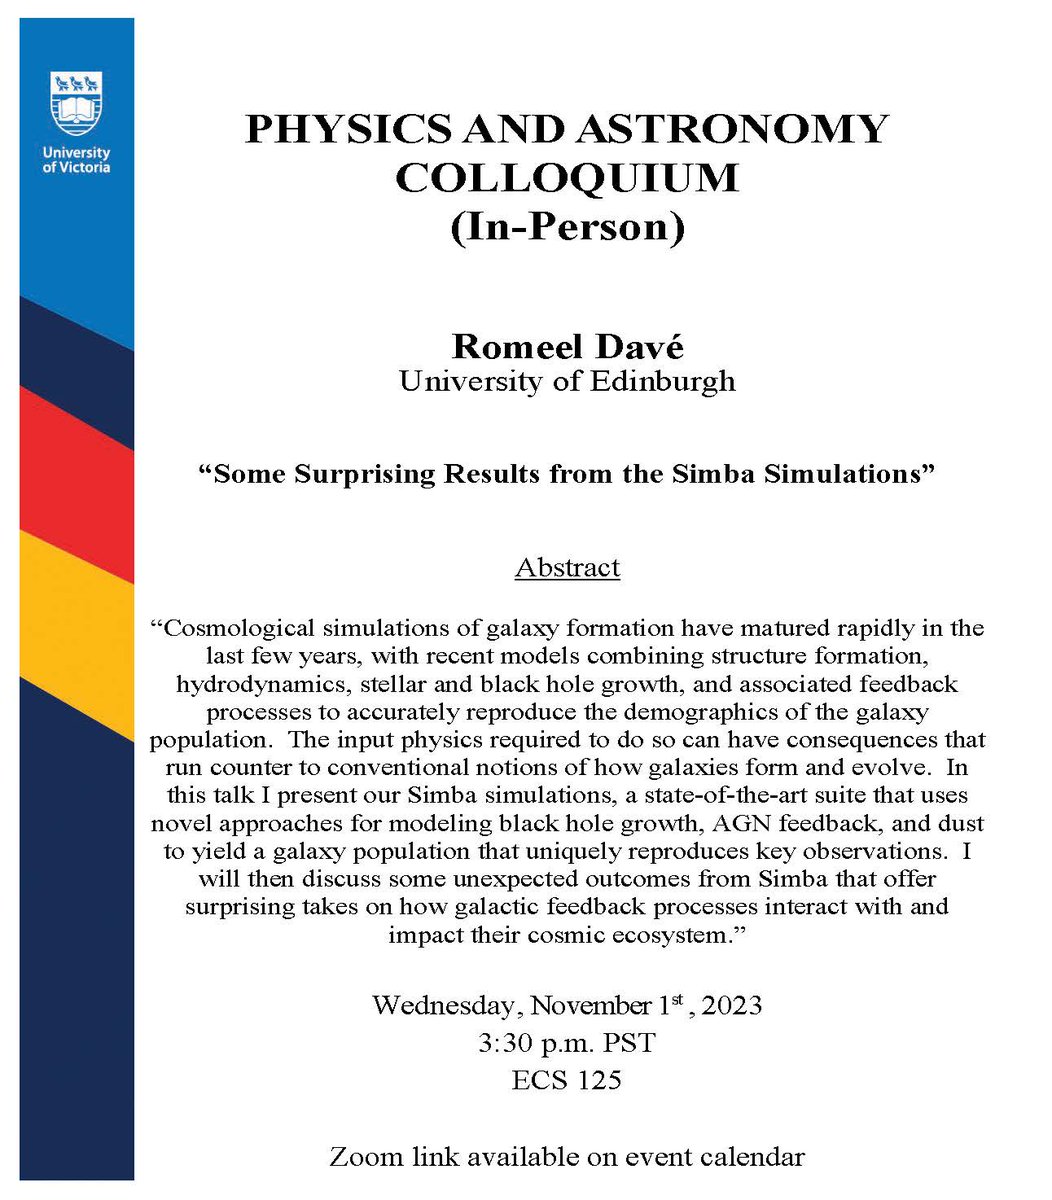 COLLOQUIUM (In Person): Dr. Romeel Davé, University of Edinburgh, will give an in person colloquium on Wednesday, November 1st at 3:30pm PST. For more information: events.uvic.ca/physics/event/…